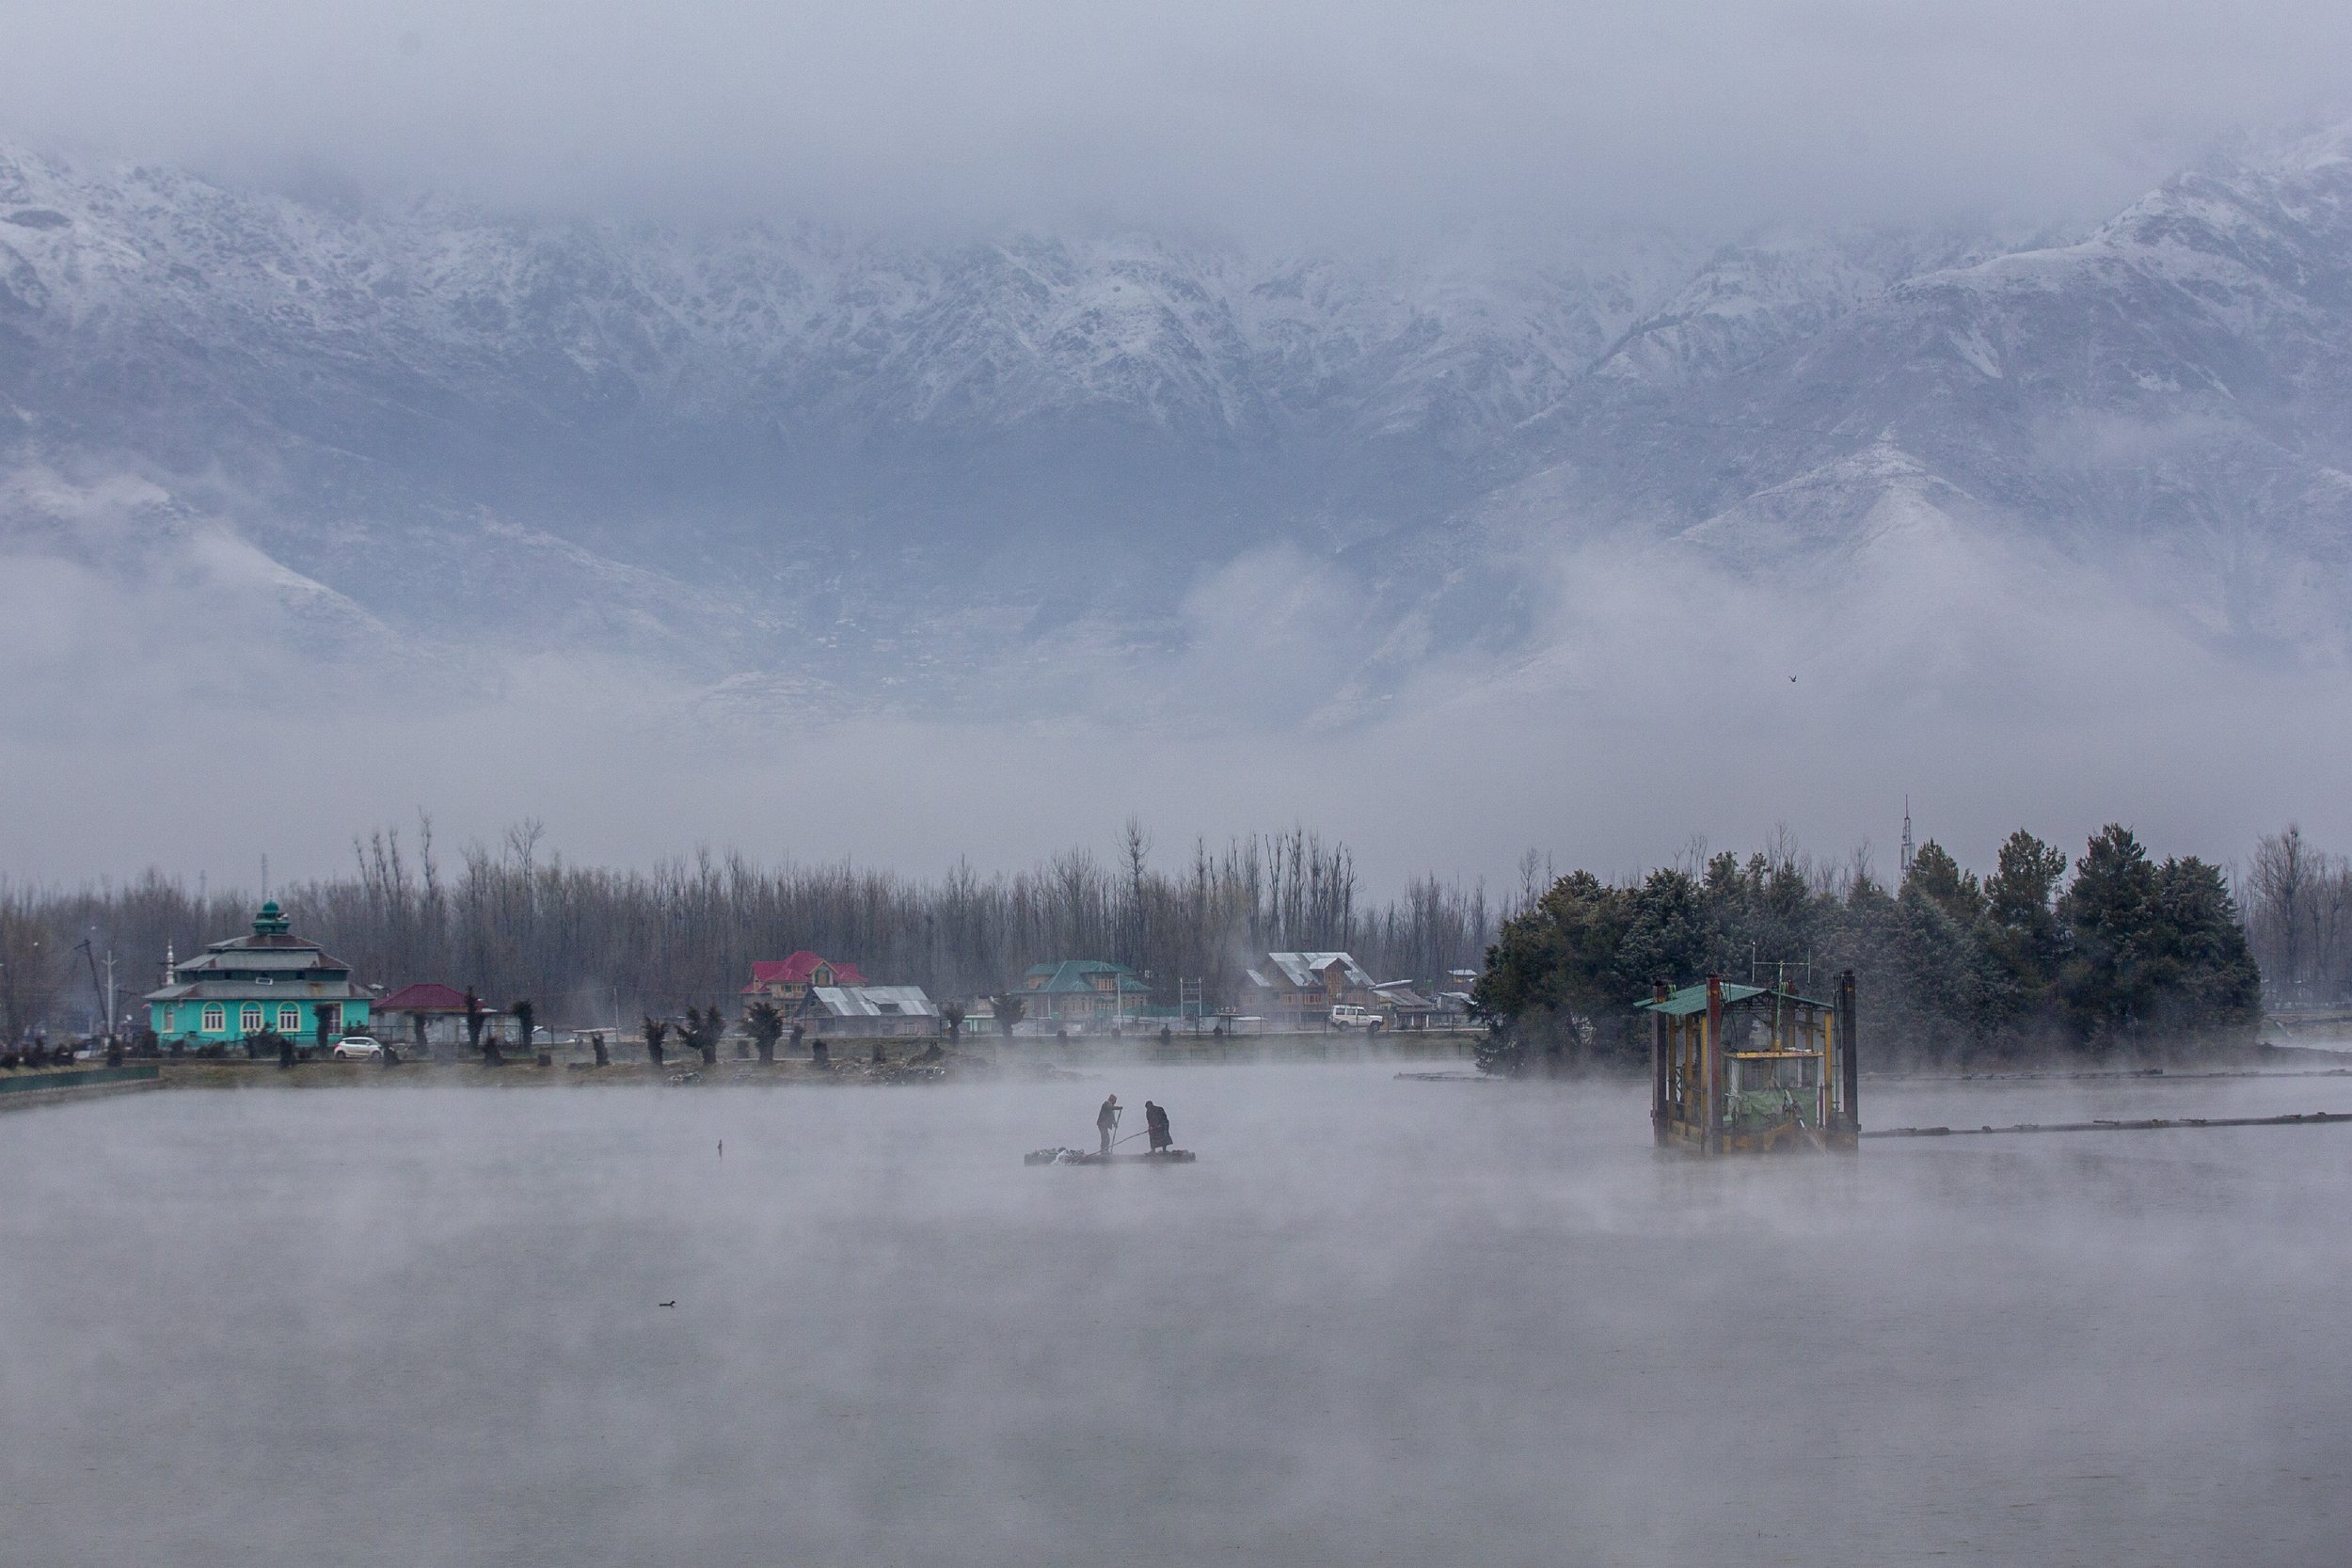  Kashmiri men row their raft made of plastic pipes on Dal Lake on the outskirts of Srinagar, Indian controlled Kashmir, after a brief spell of fresh snowfall, on Feb. 27, 2021. (AP Photo/Dar Yasin) 